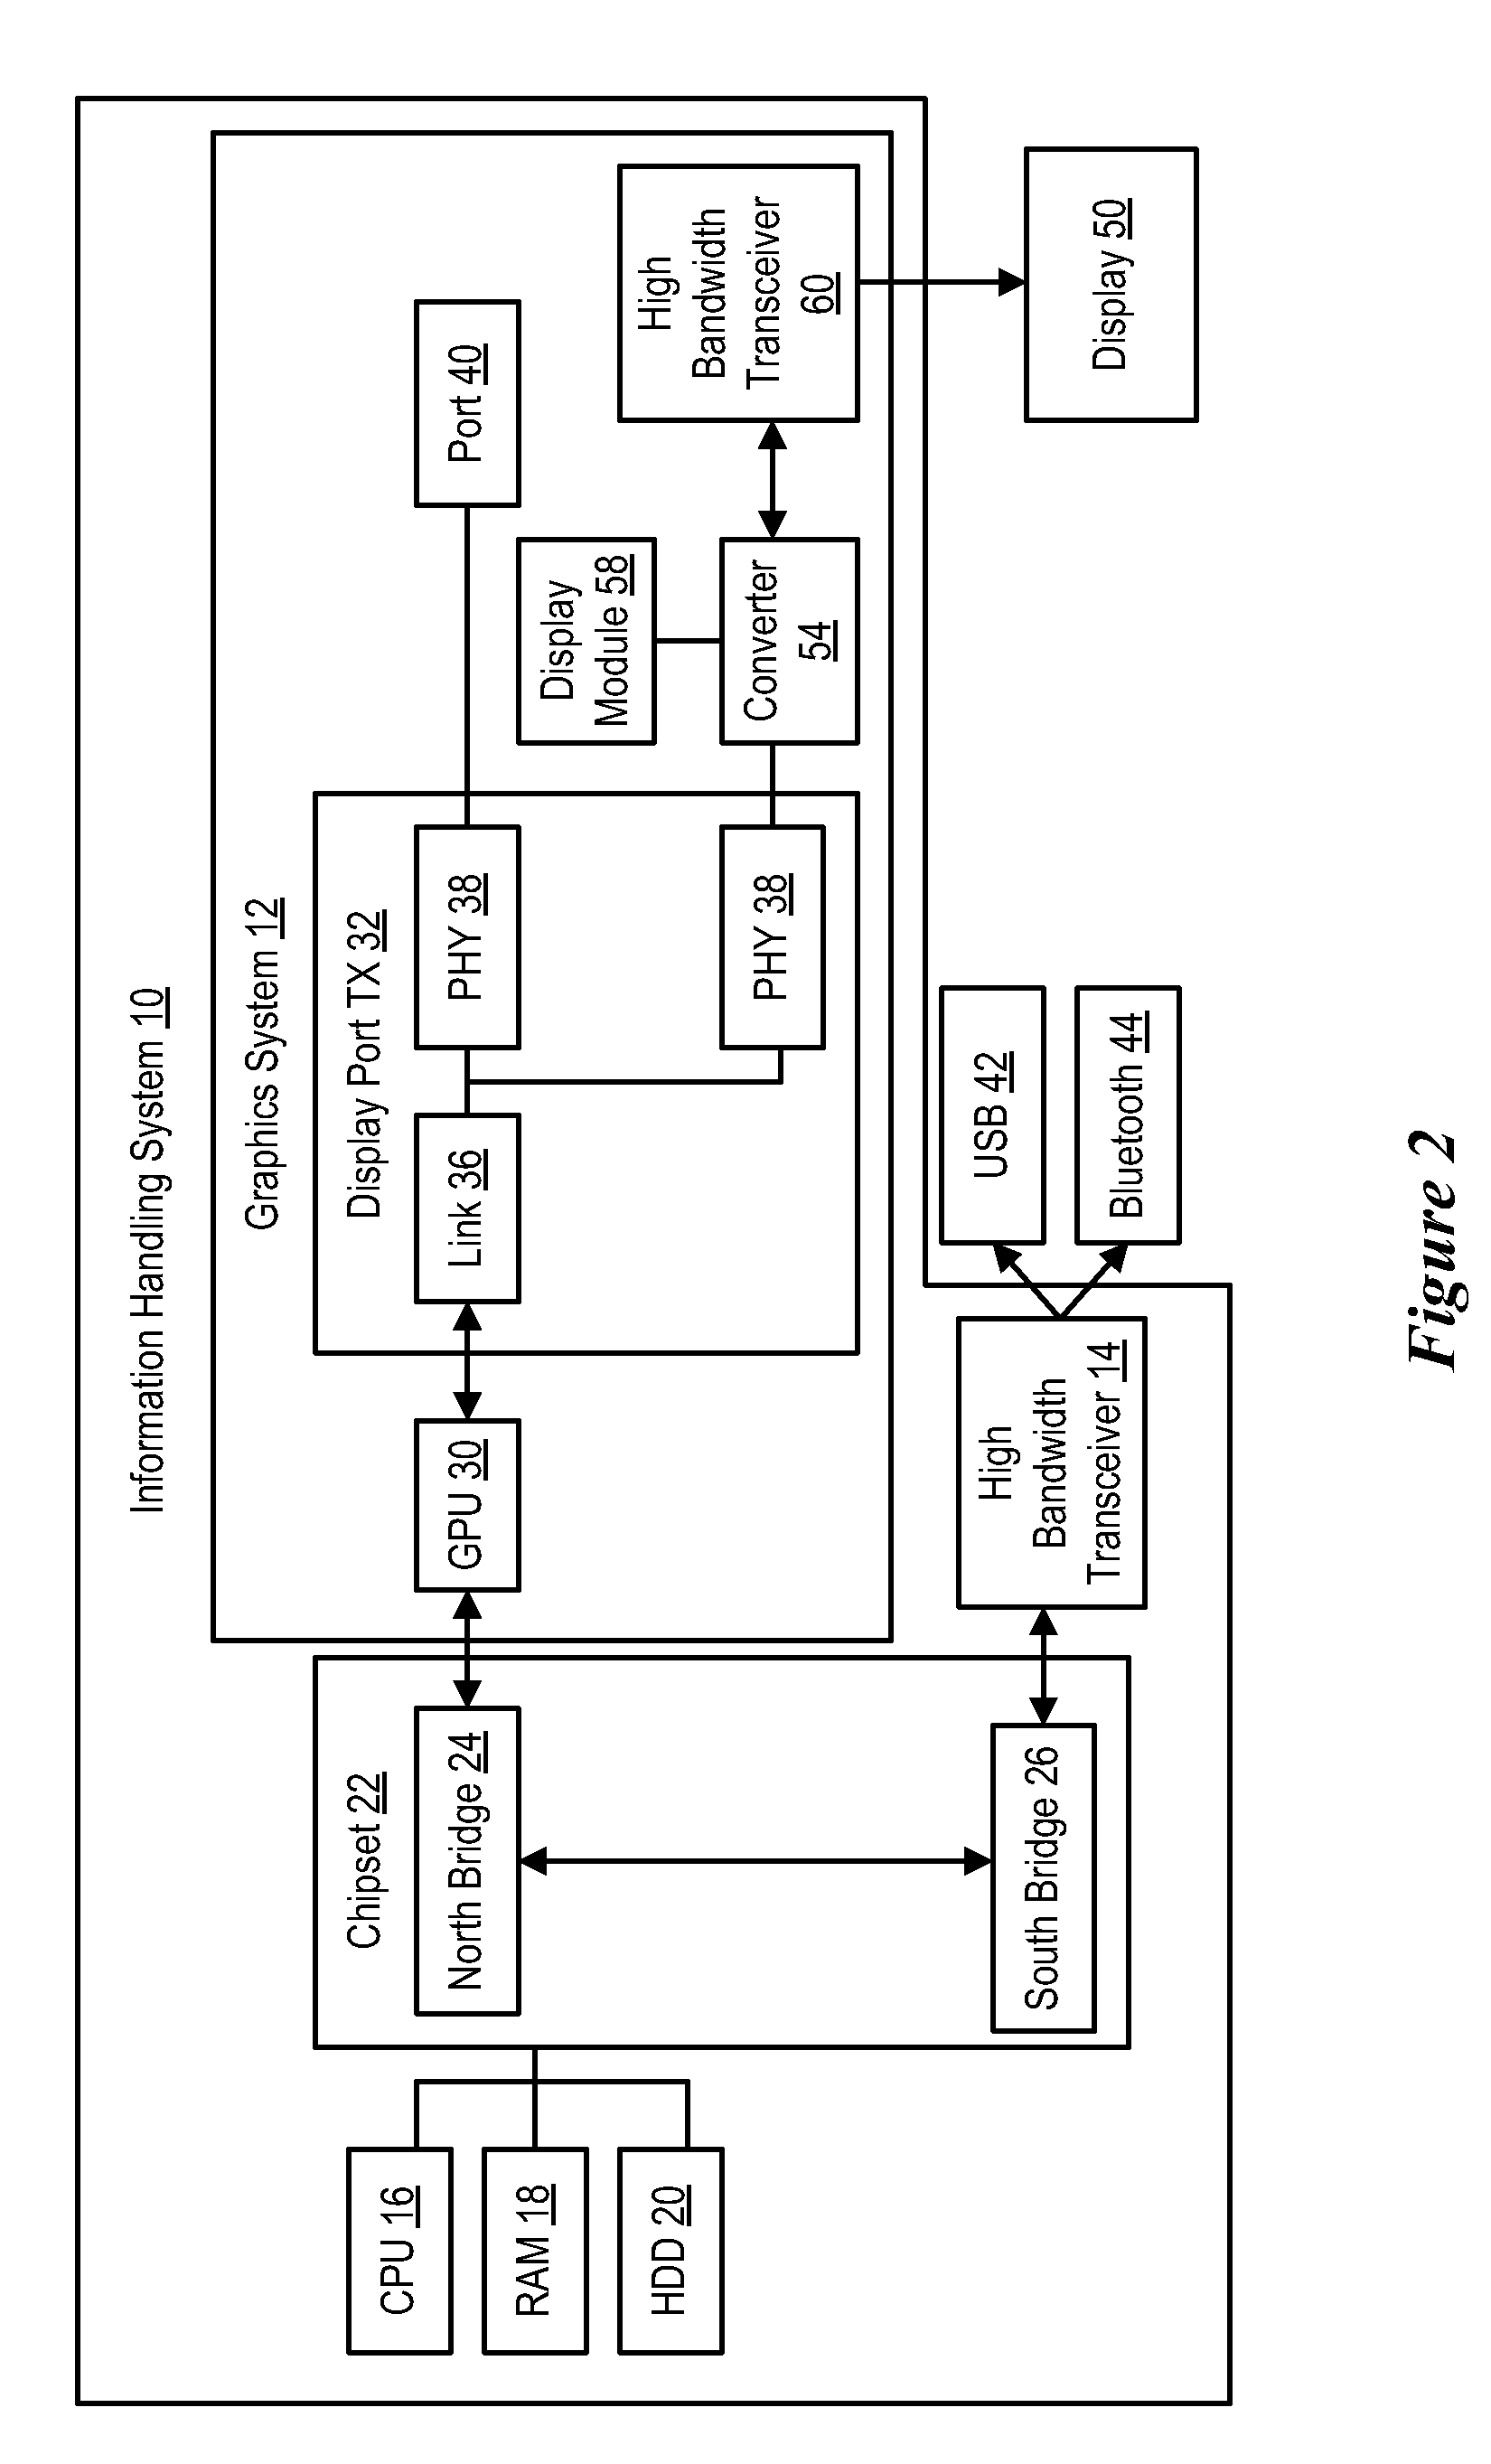 System and Method for Interfacing Graphical Information with an Information Handling System Wireless Transceiver